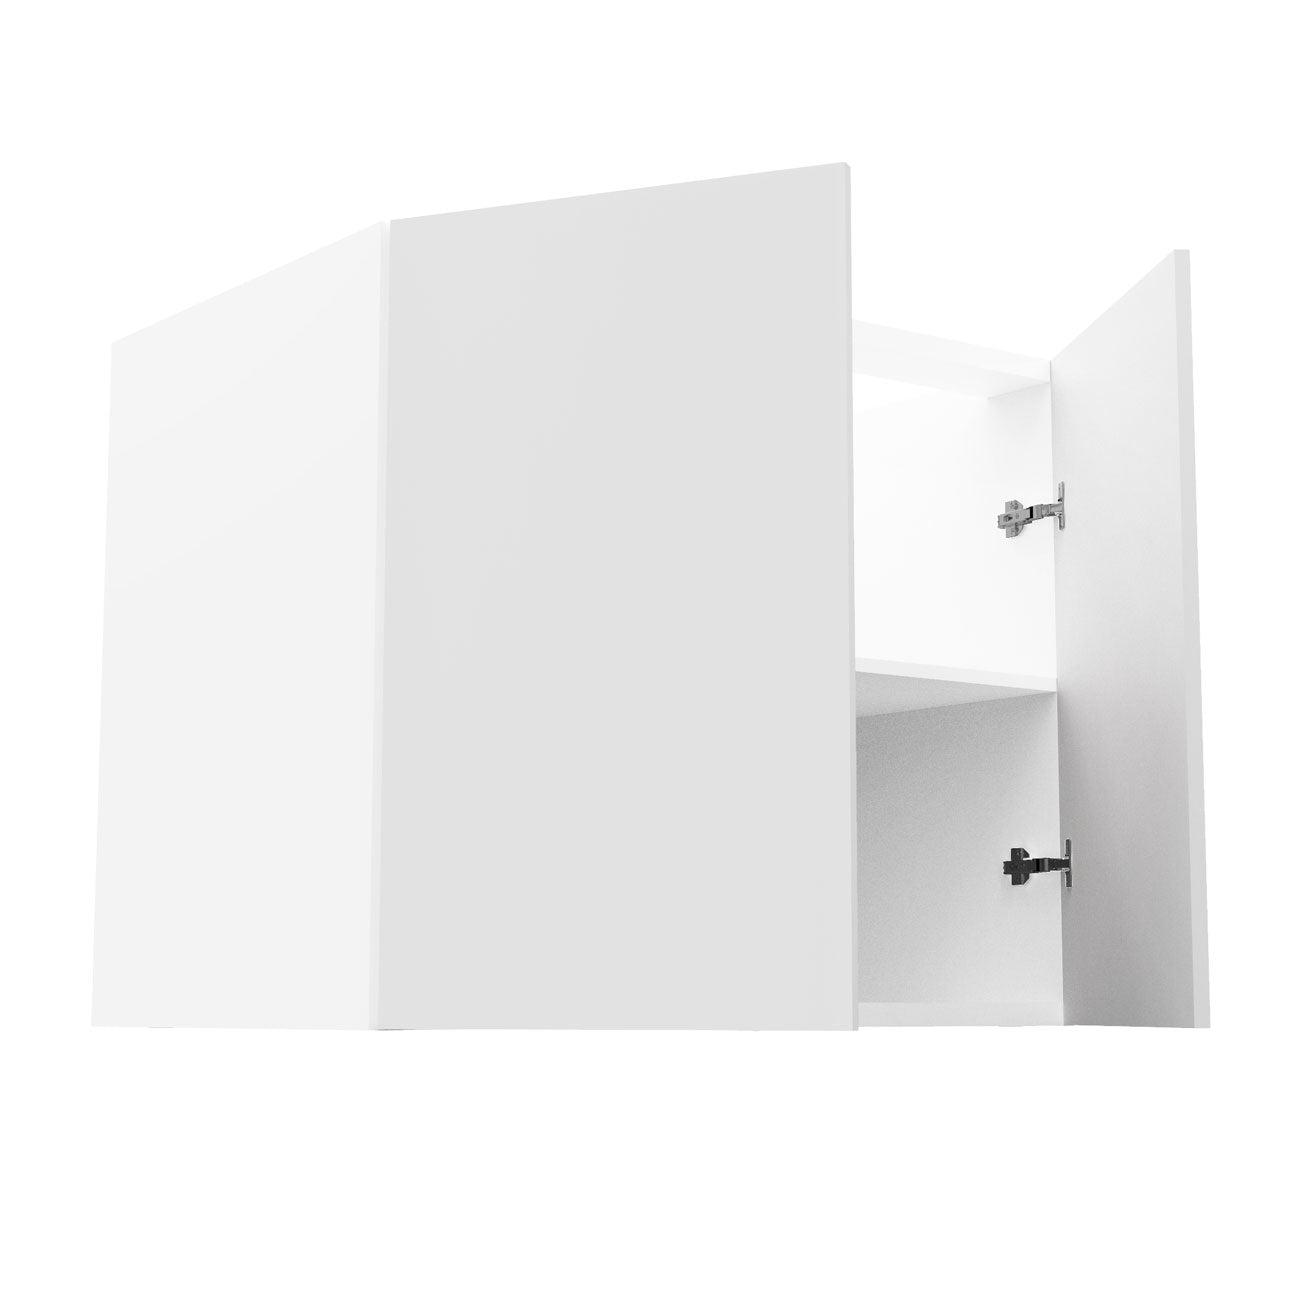 RTA - Glossy White - Full Height Double Door Base Cabinets | 36"W x 34.5"H x 24"D